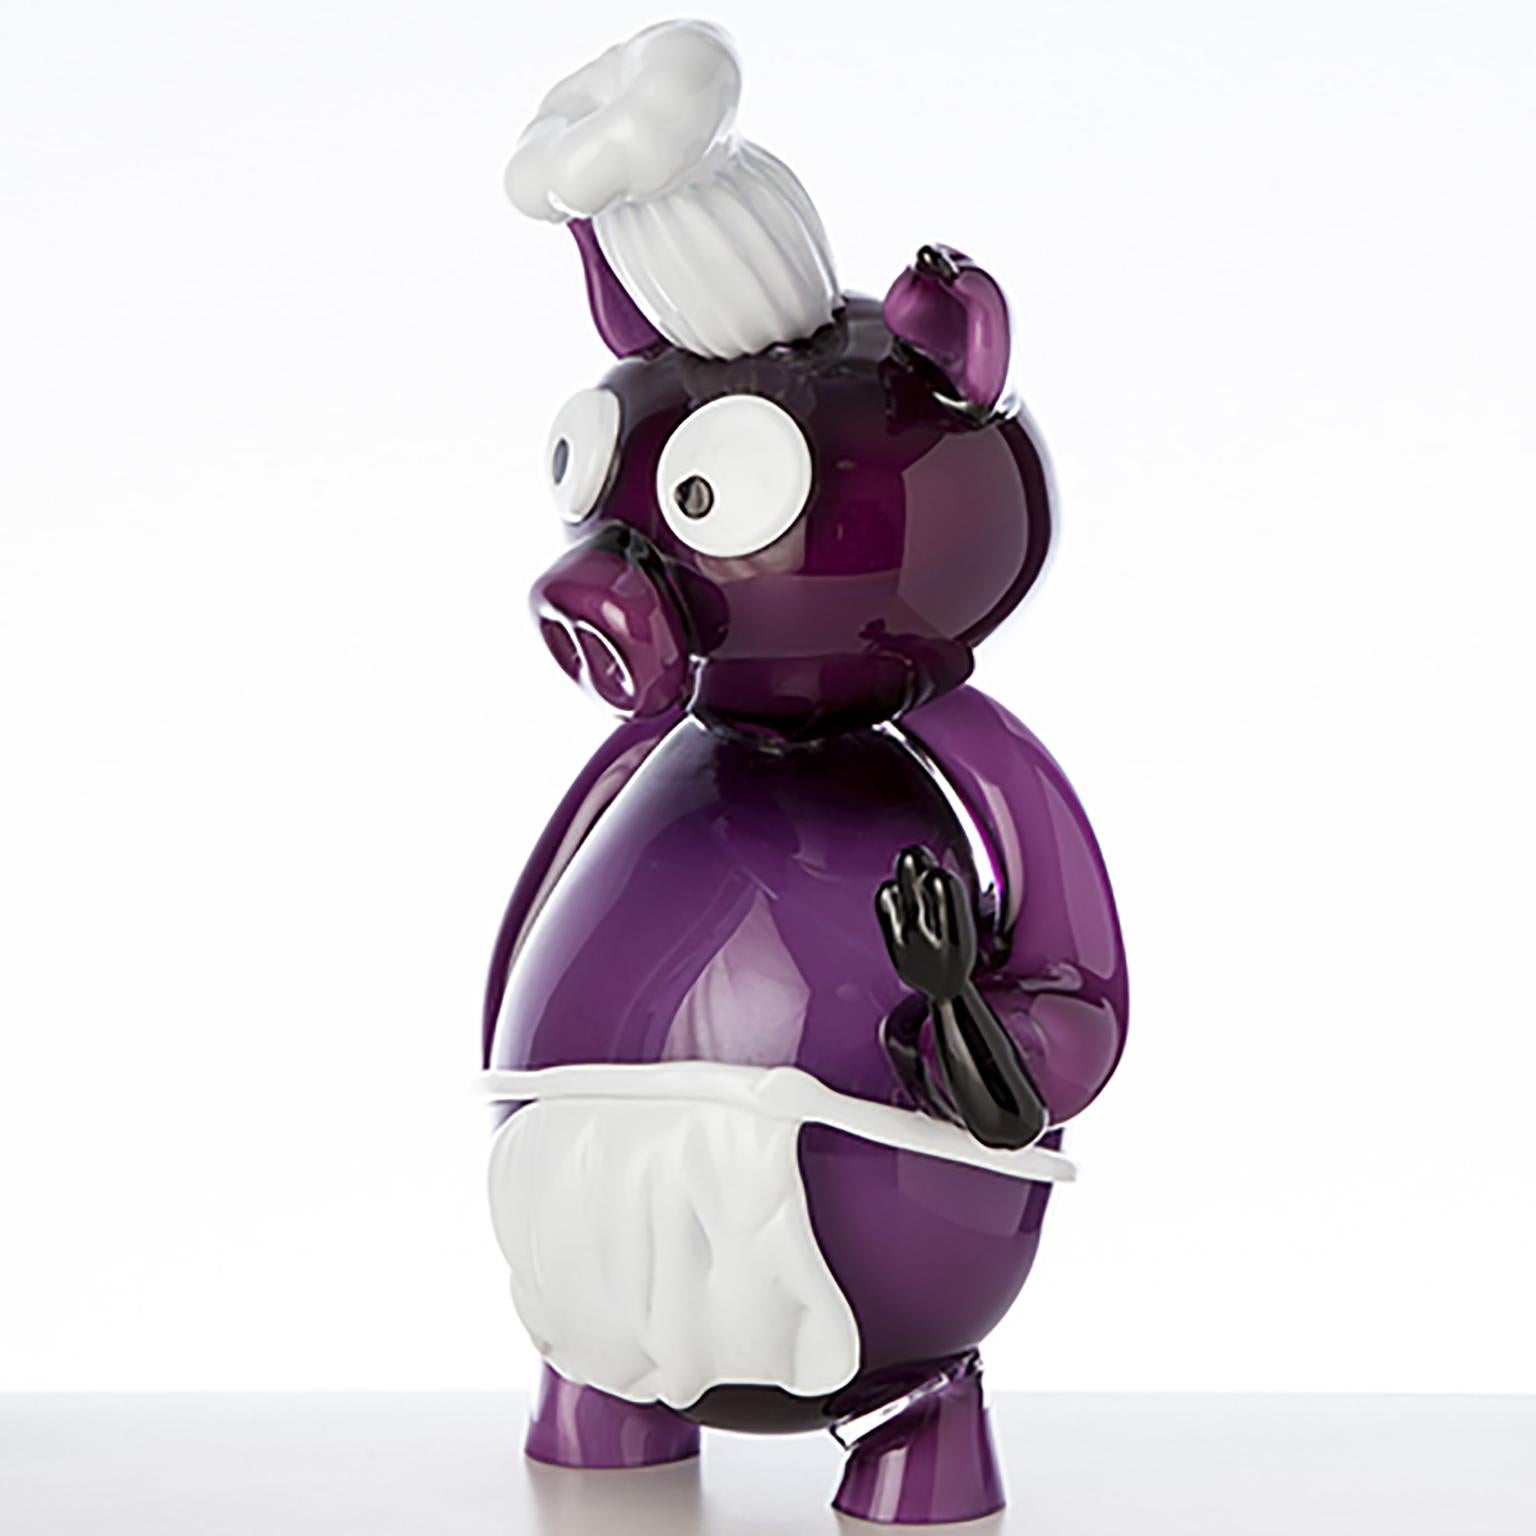 Chef Pork, a blown glass pop comic figurine created by Roberto Beltrami, in Murano glass.

Part of a comic and pop collection in Murano glass, the 'PUPI' are 100% mouth-blown and entirely handmade, offering complete customization upon request.